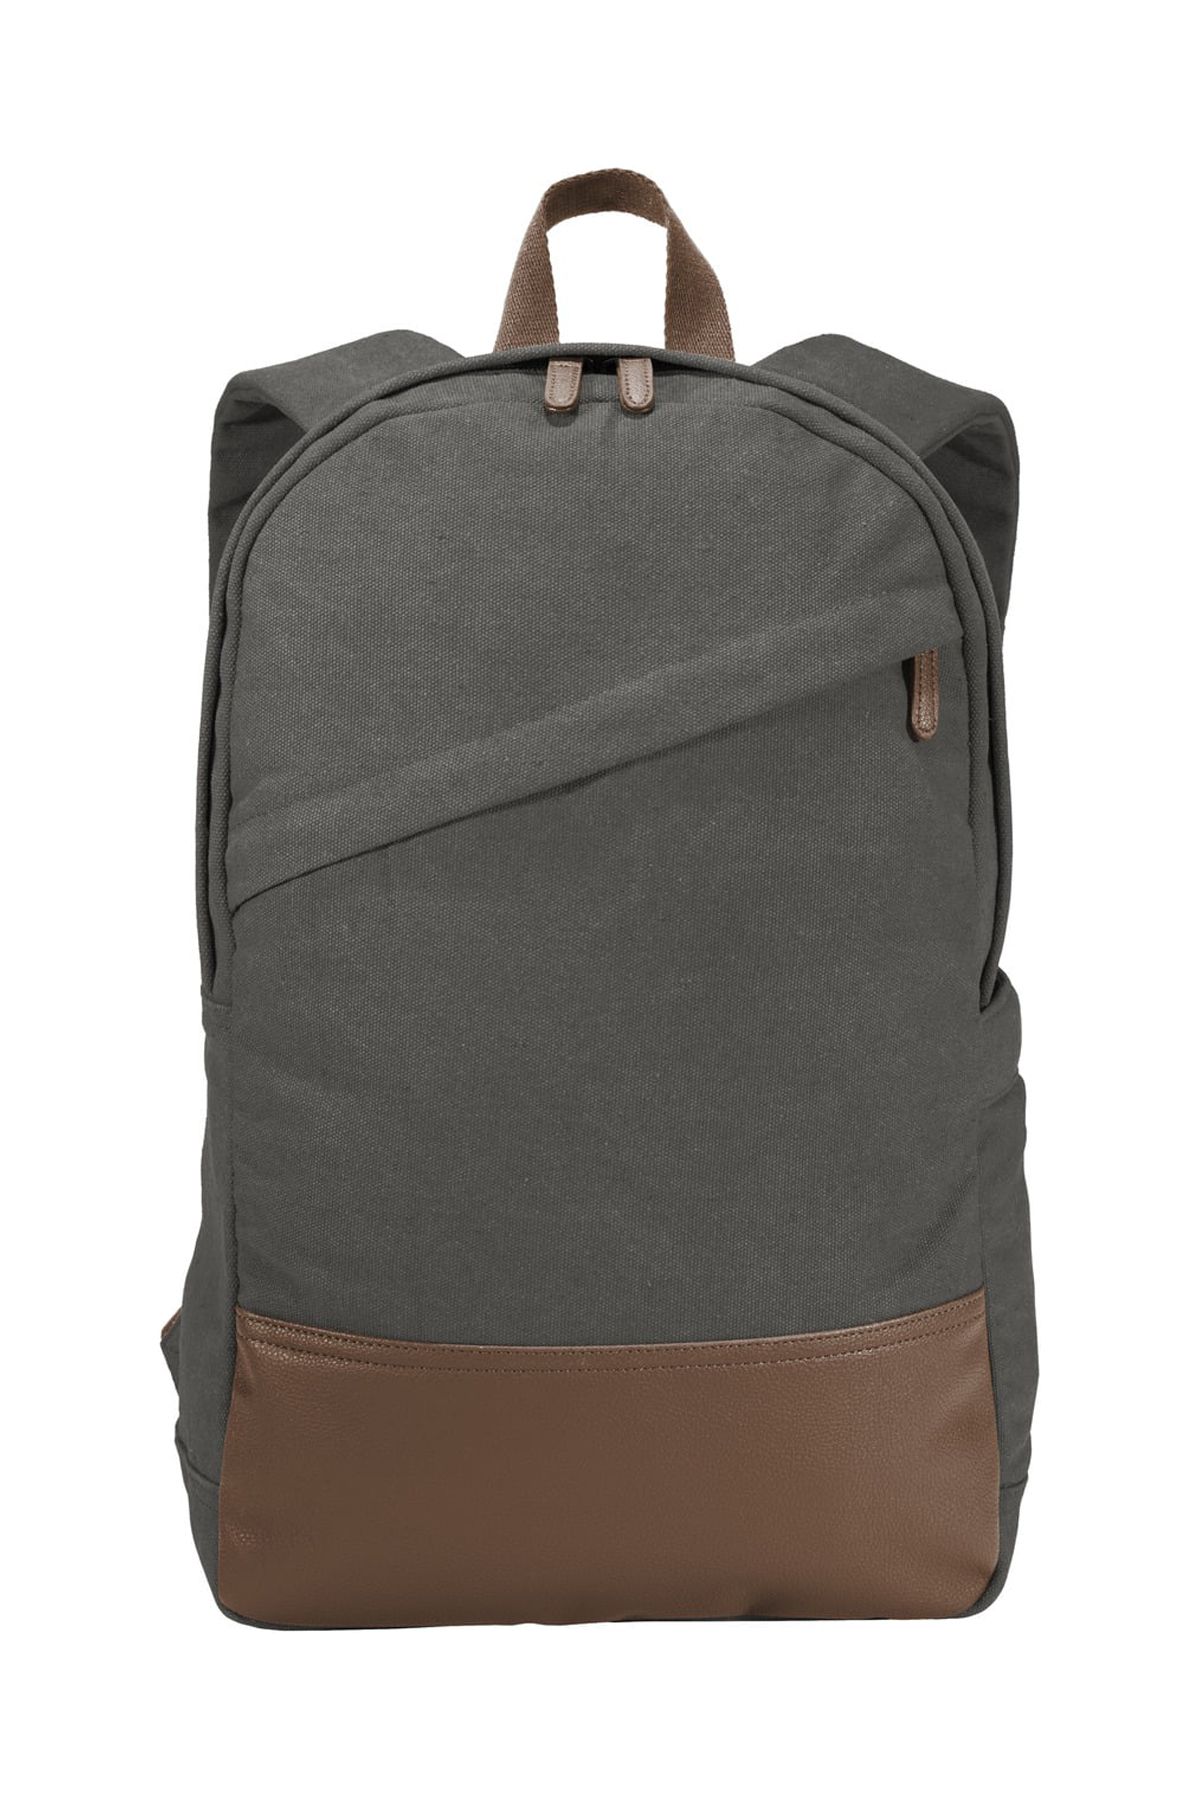 Port Authority Bg210 Cotton Canvas Backpack - image 2 of 3